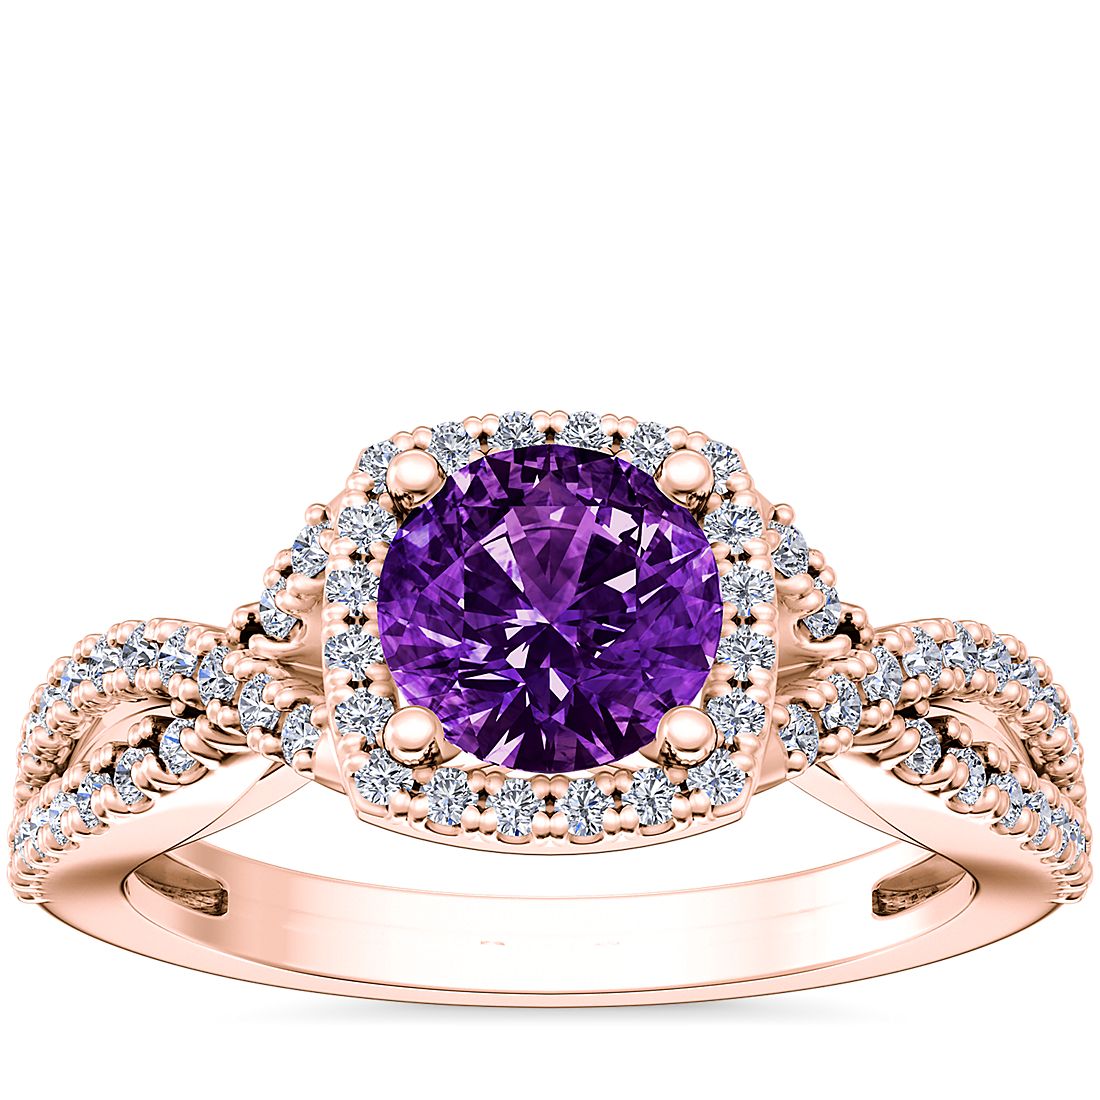 Twist Halo Diamond Engagement Ring with Round Amethyst in 14k Rose Gold (6.5mm)